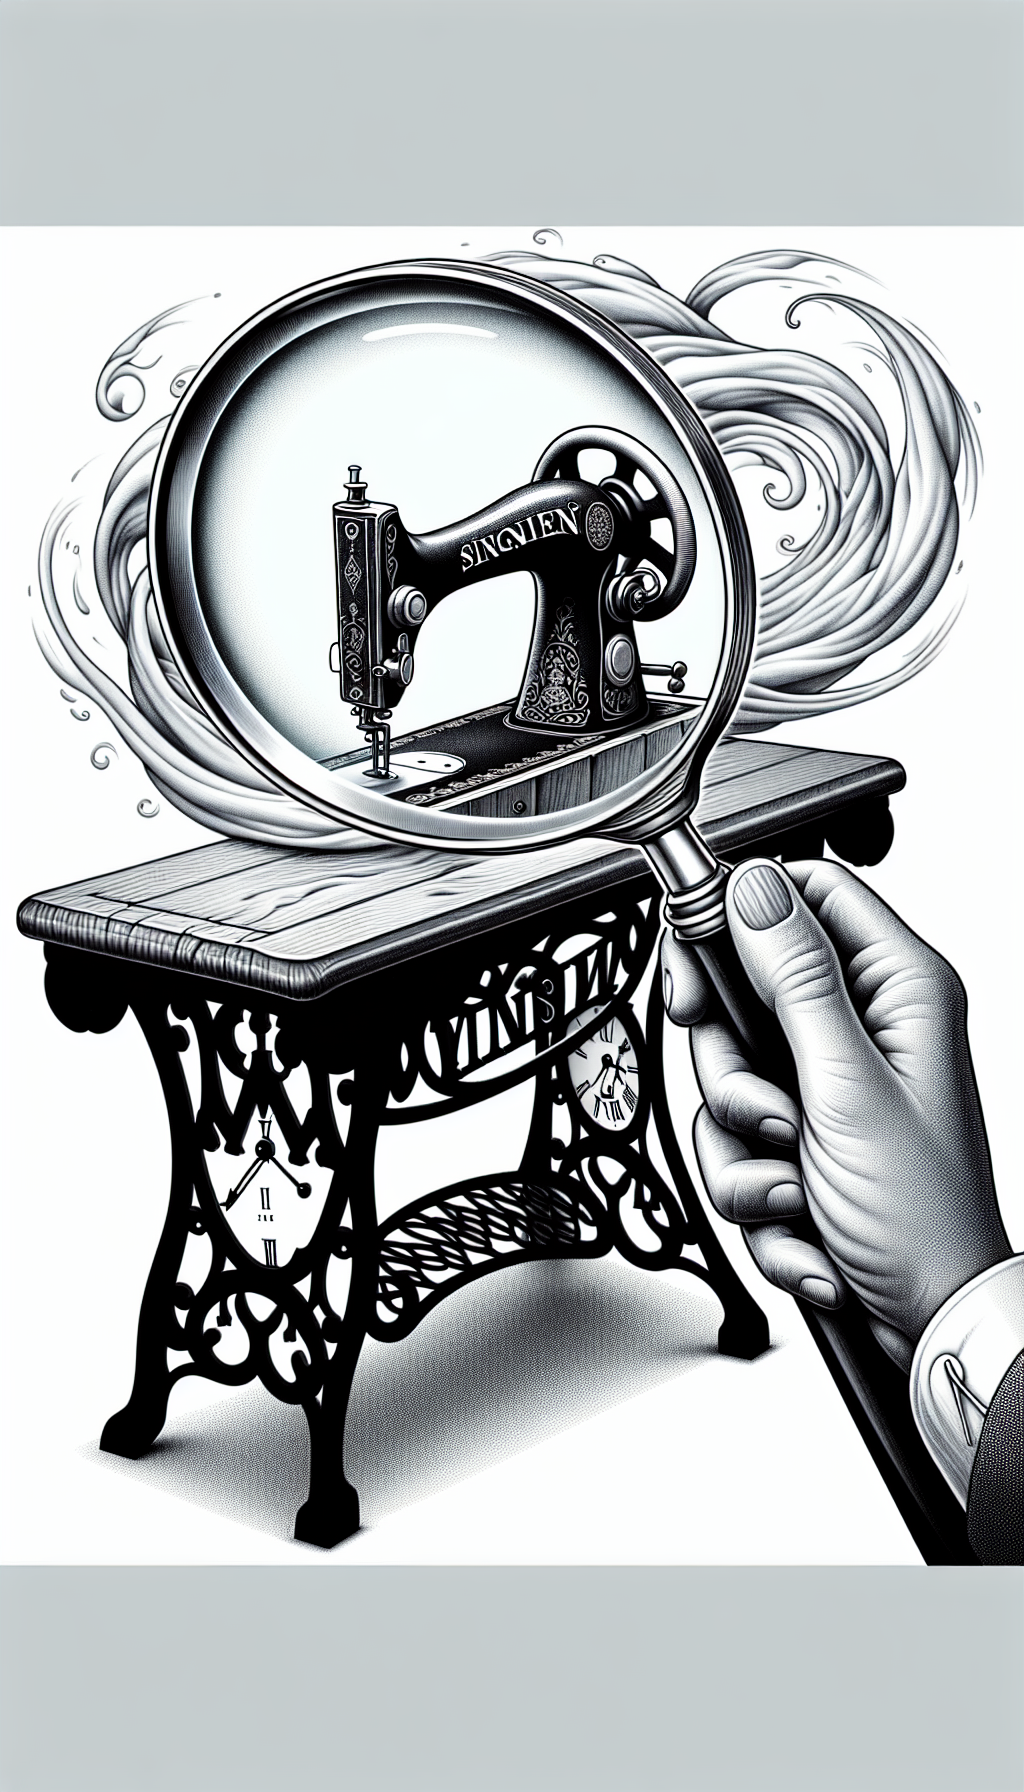 An illustration featuring a magnifying glass held above a vintage Singer sewing machine table, with the legs dramatically engraved with dates and Roman numerals. Through the glass, we see a close-up of the serial number typical of antiques, which subtly transitions into a price tag displaying its high value. The machine and table are enveloped by swirling, misty clock hands, symbolizing the passage of time.